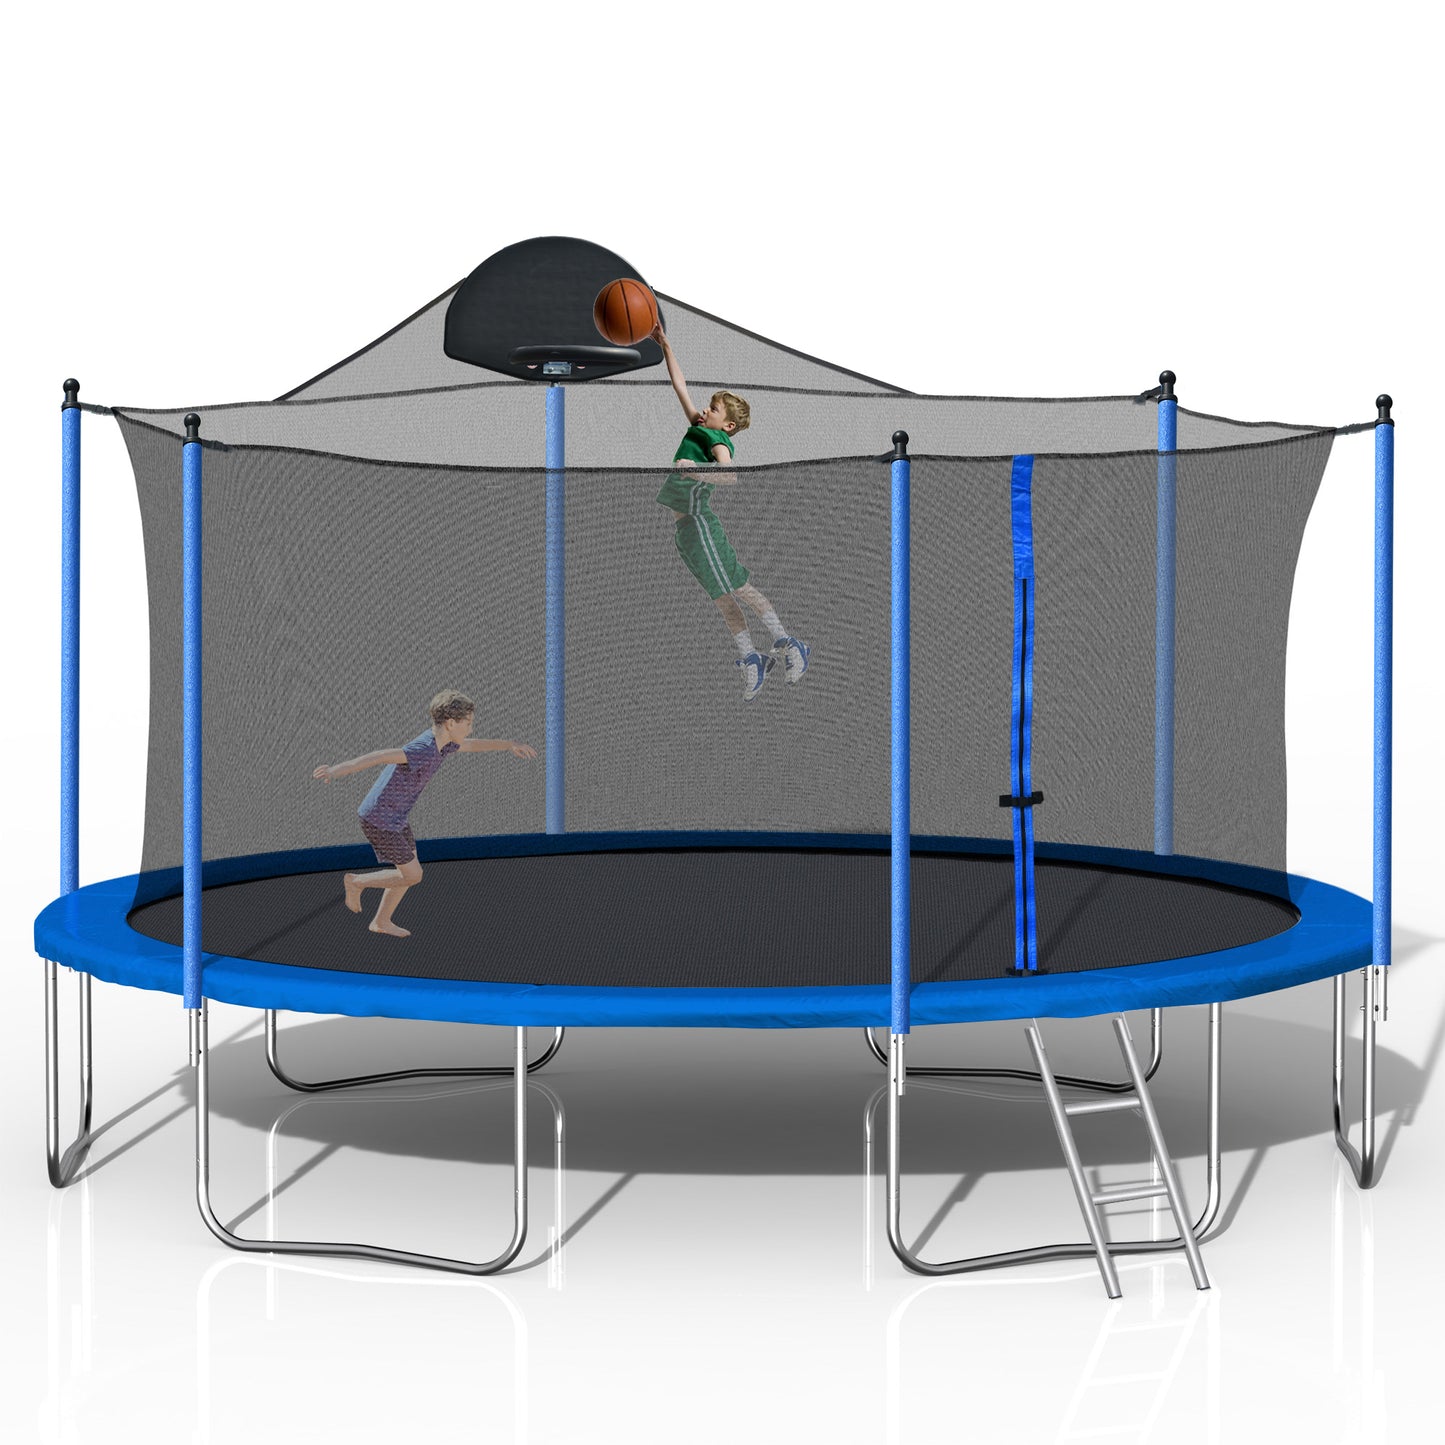 14FT Trampoline for Adults & Kids with Basketball Hoop, Outdoor Trampolines w/Ladder and Safety Enclosure Net for Kids and Adults,Double-side Color cover